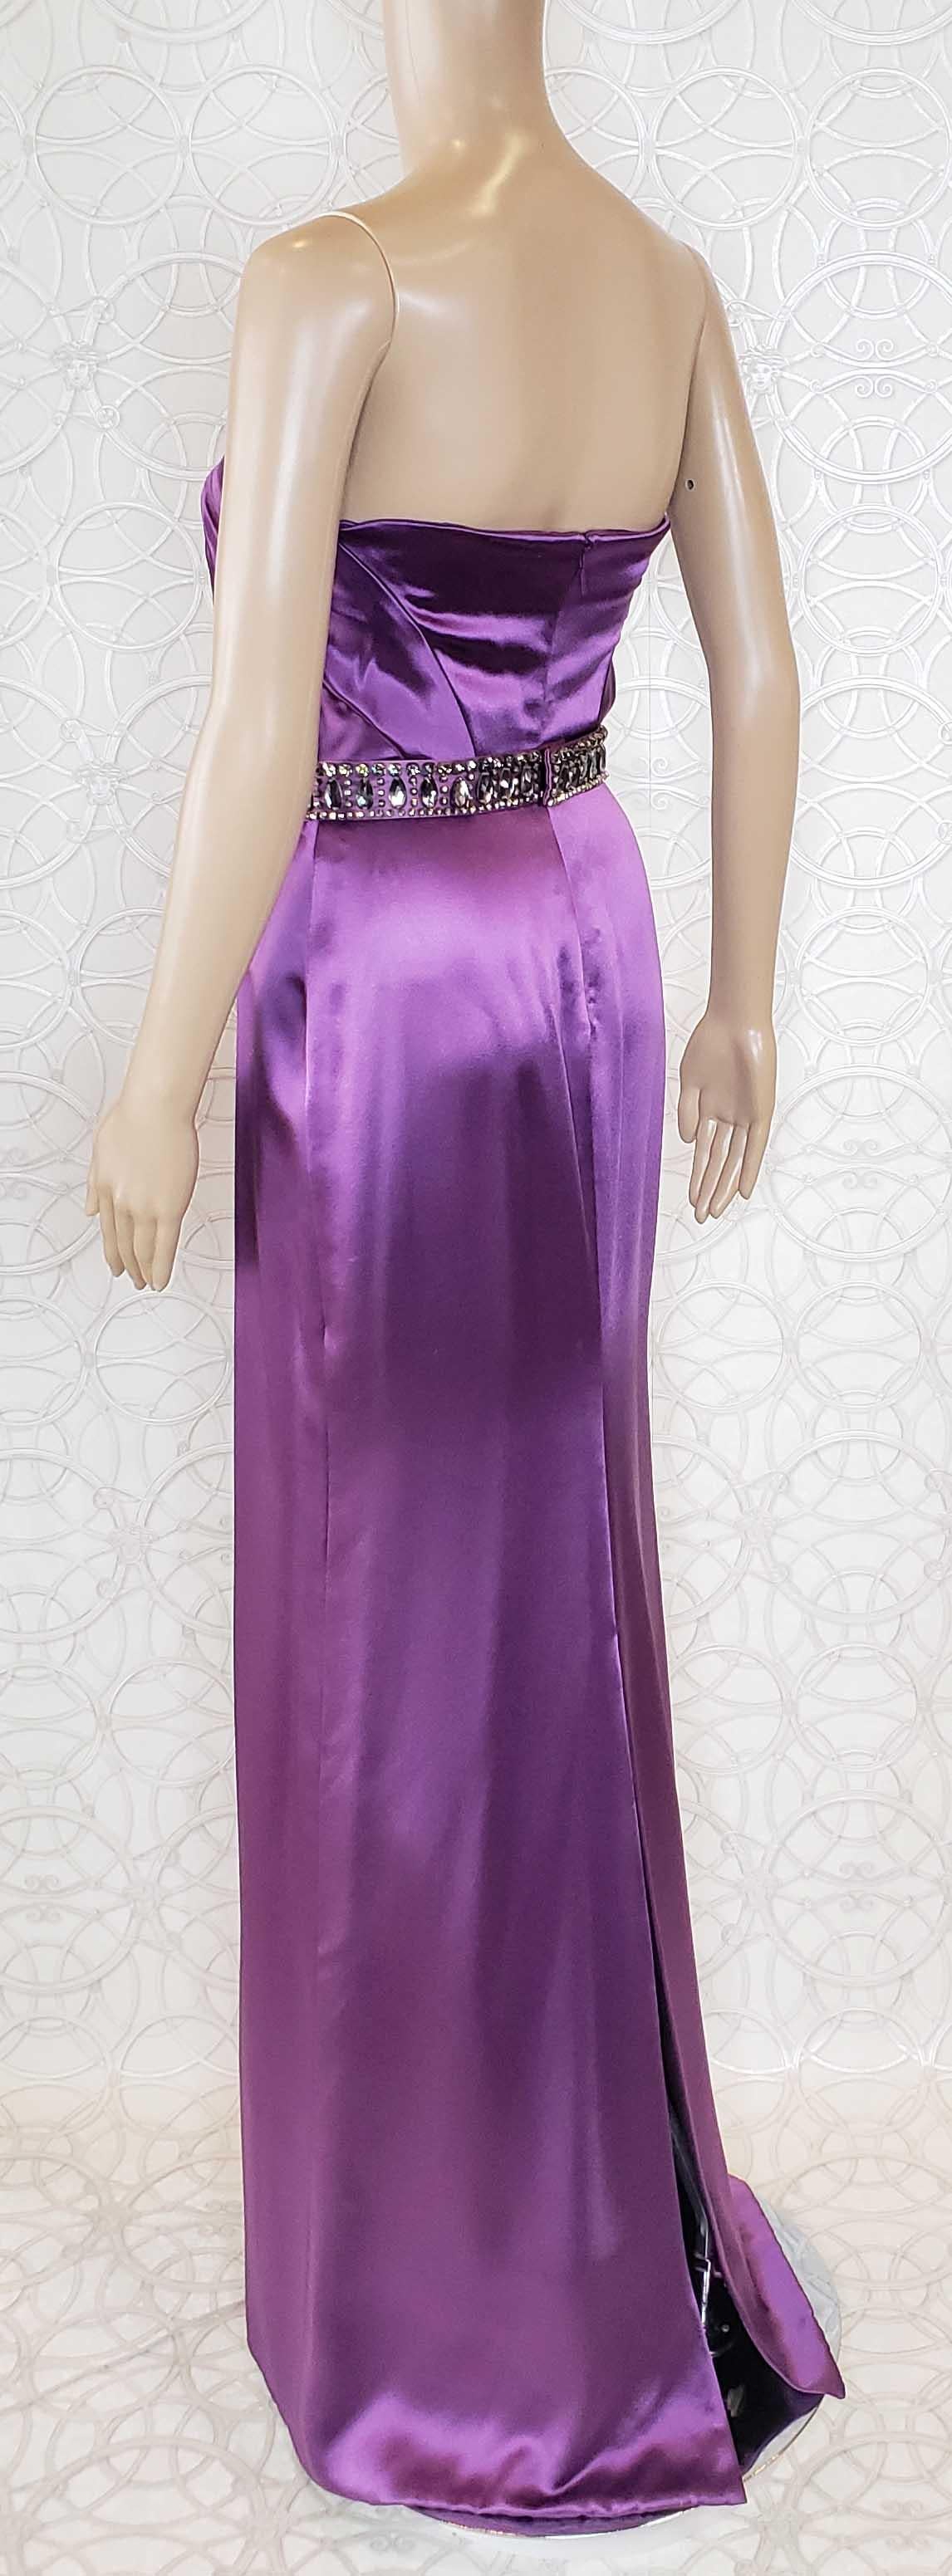 Purple NEW VERSACE EMBELLISHED AMETHYST STRAPLESS GOWN DRESS EVA WORE IN Paris! 38 - 2 For Sale